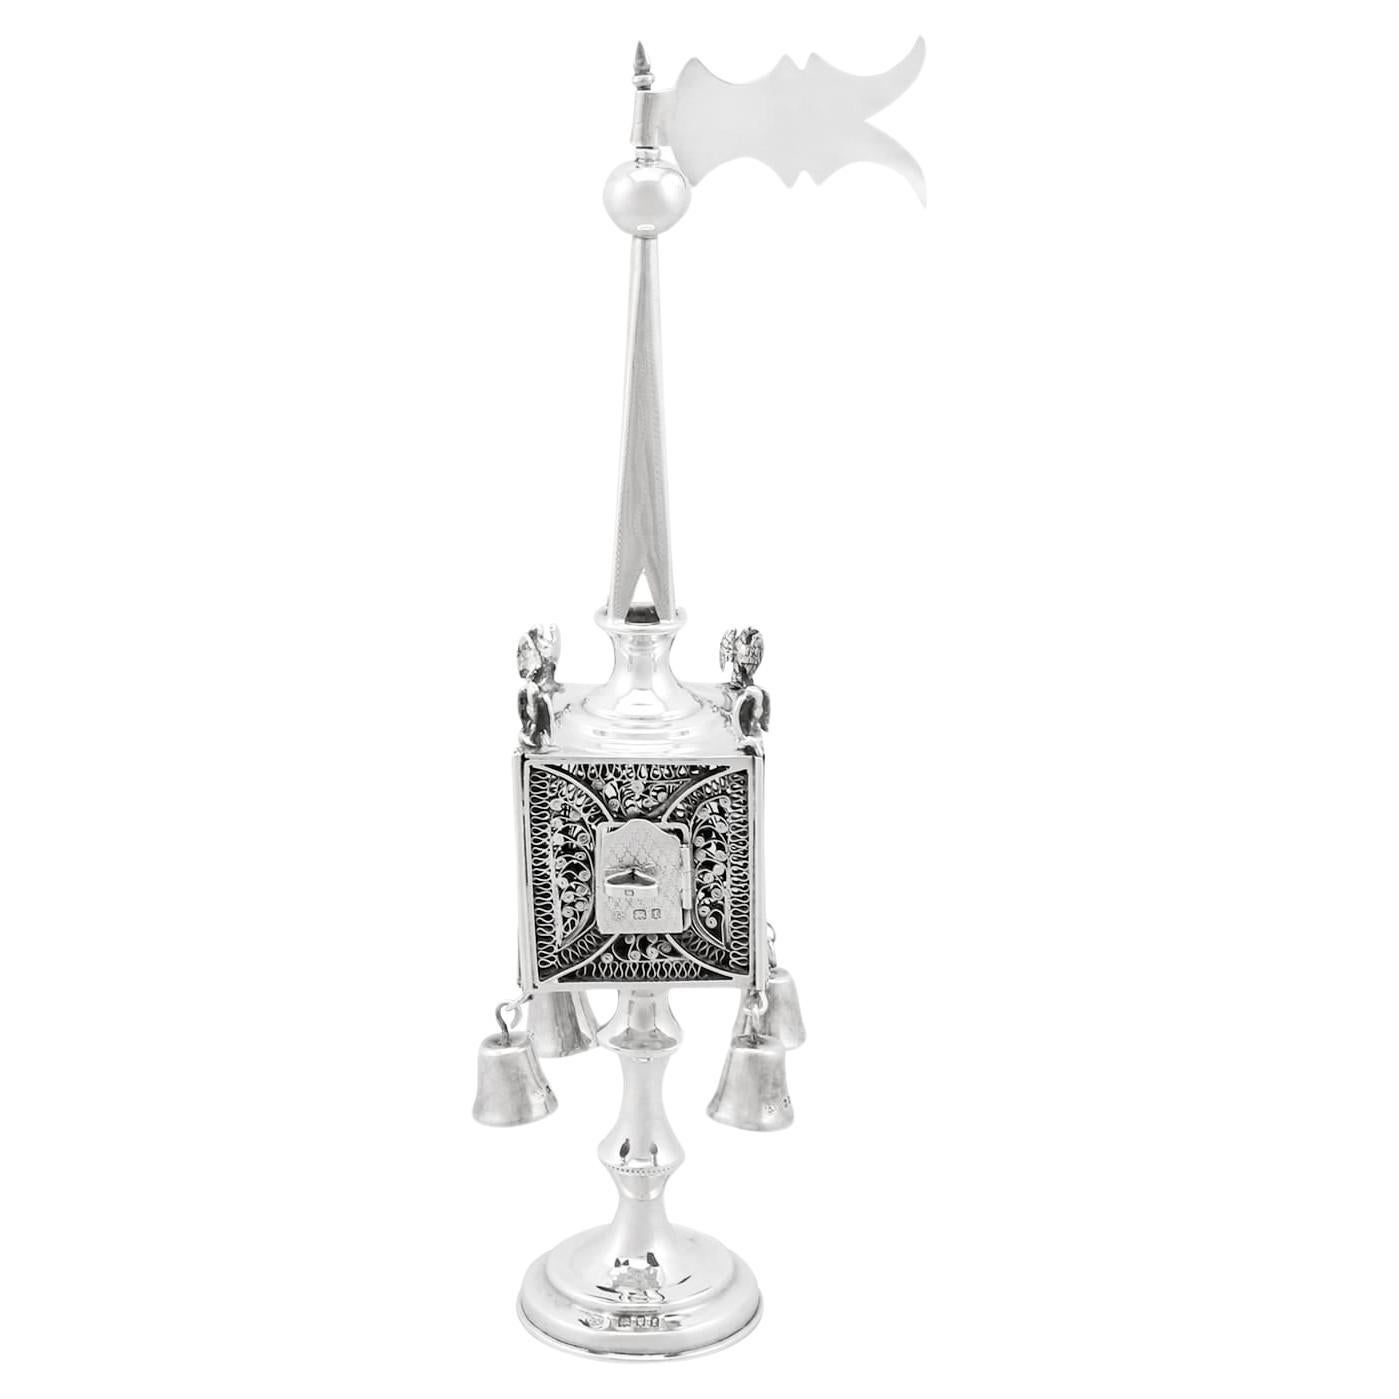 1921 Antique Sterling Silver Spice Tower